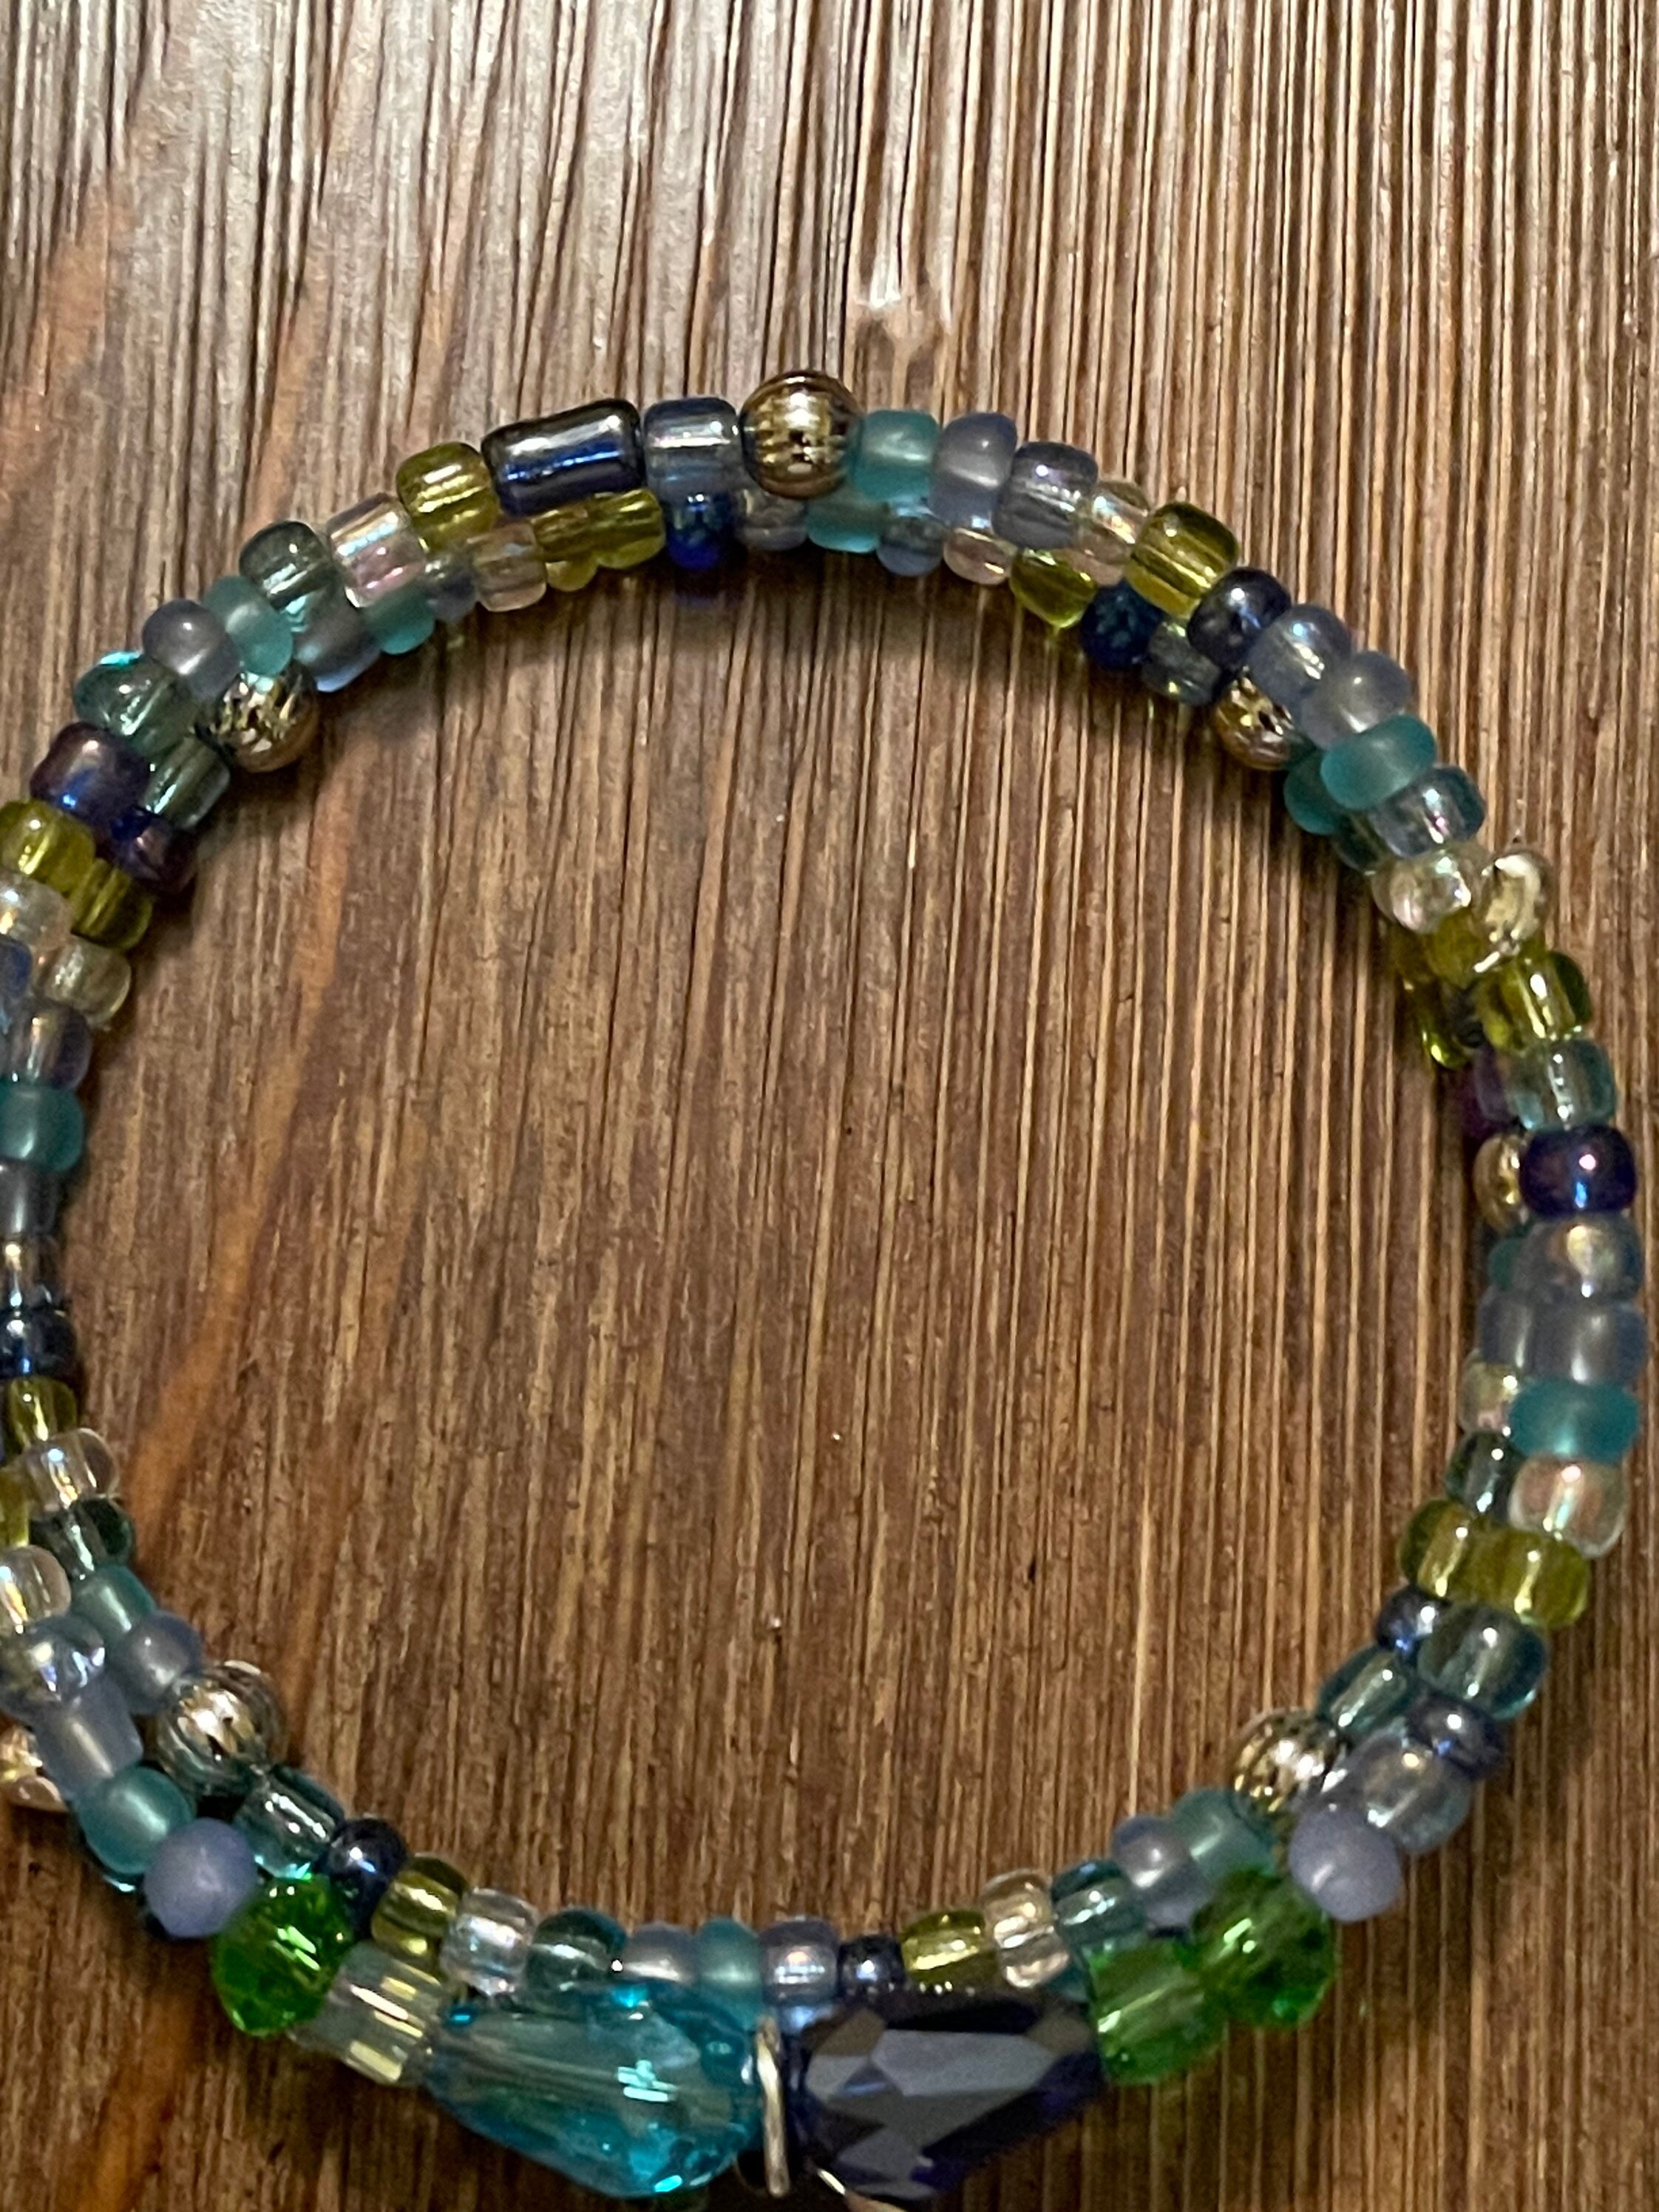 Thrifted a gorgeous bead bracelet that was way too big, turned it